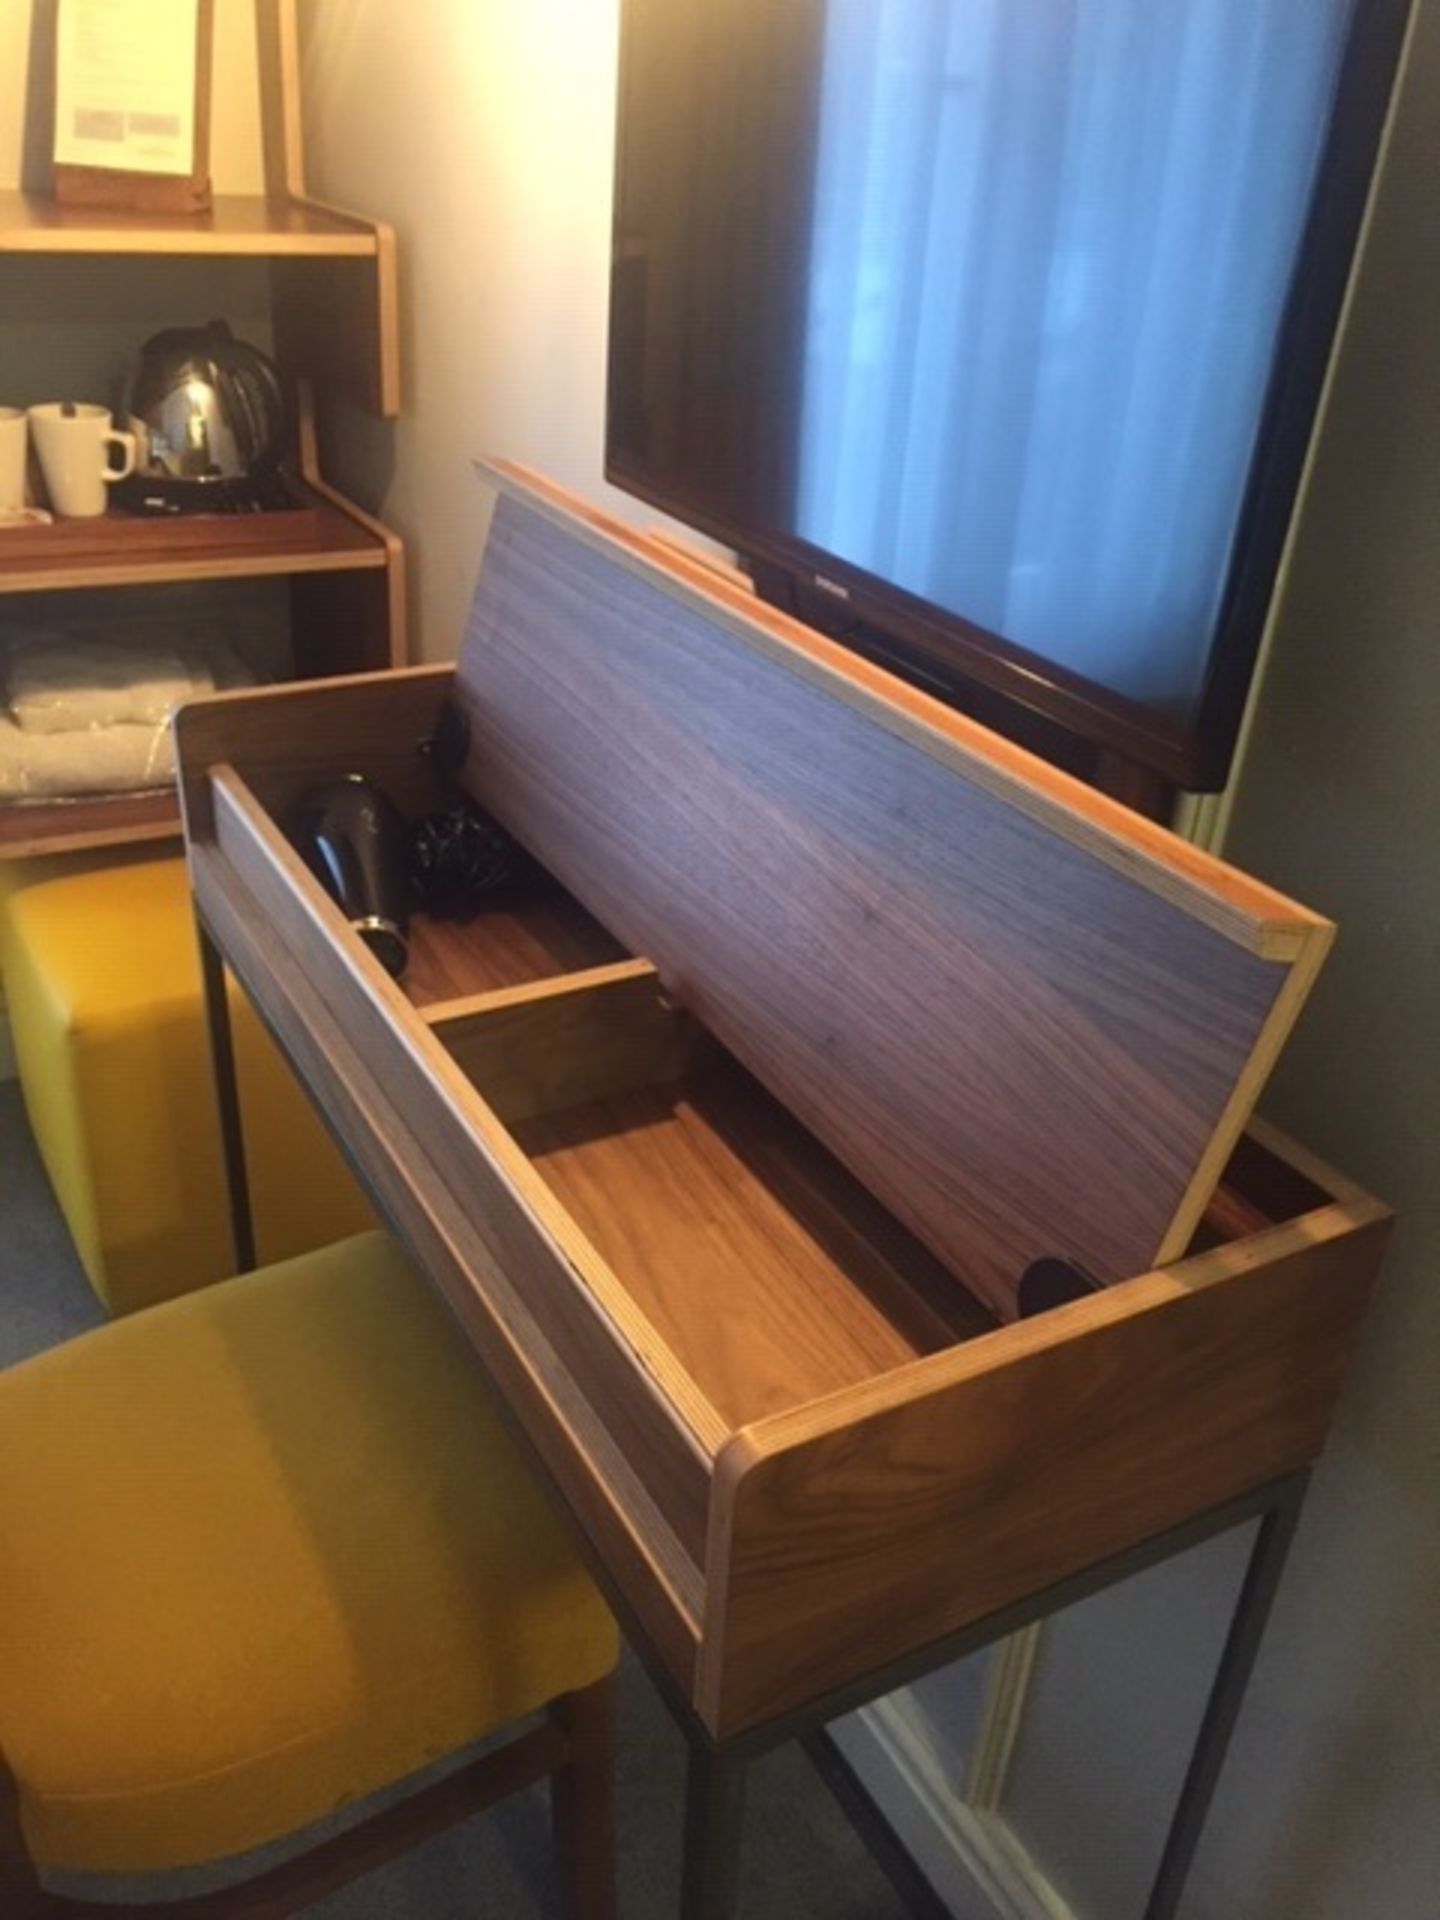 Slim line wood desk with lid for internal storage - matching other items listed. Commercial quality. - Image 2 of 3